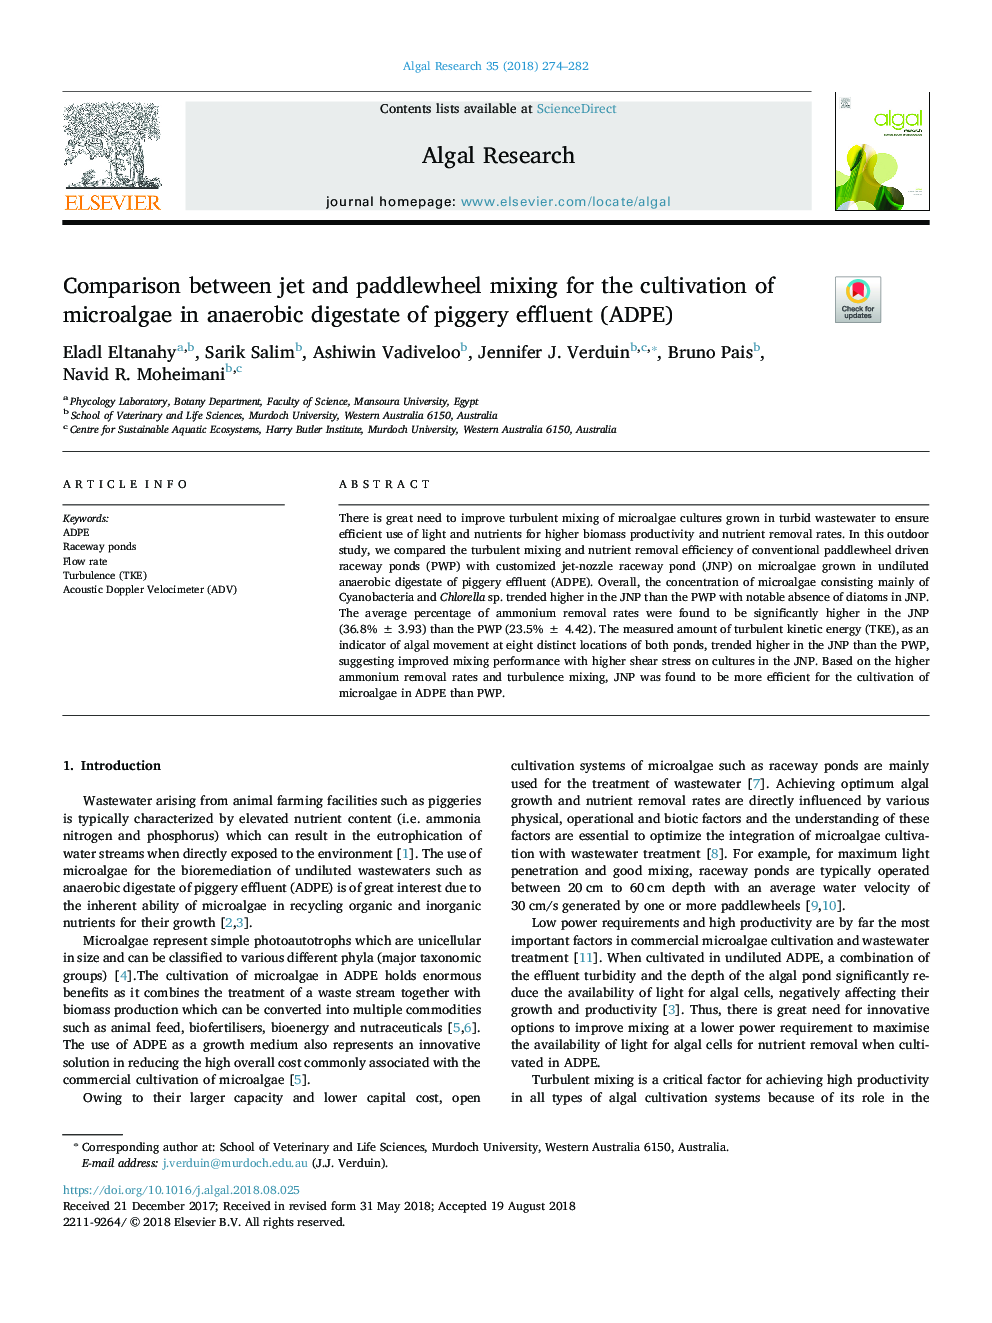 Comparison between jet and paddlewheel mixing for the cultivation of microalgae in anaerobic digestate of piggery effluent (ADPE)